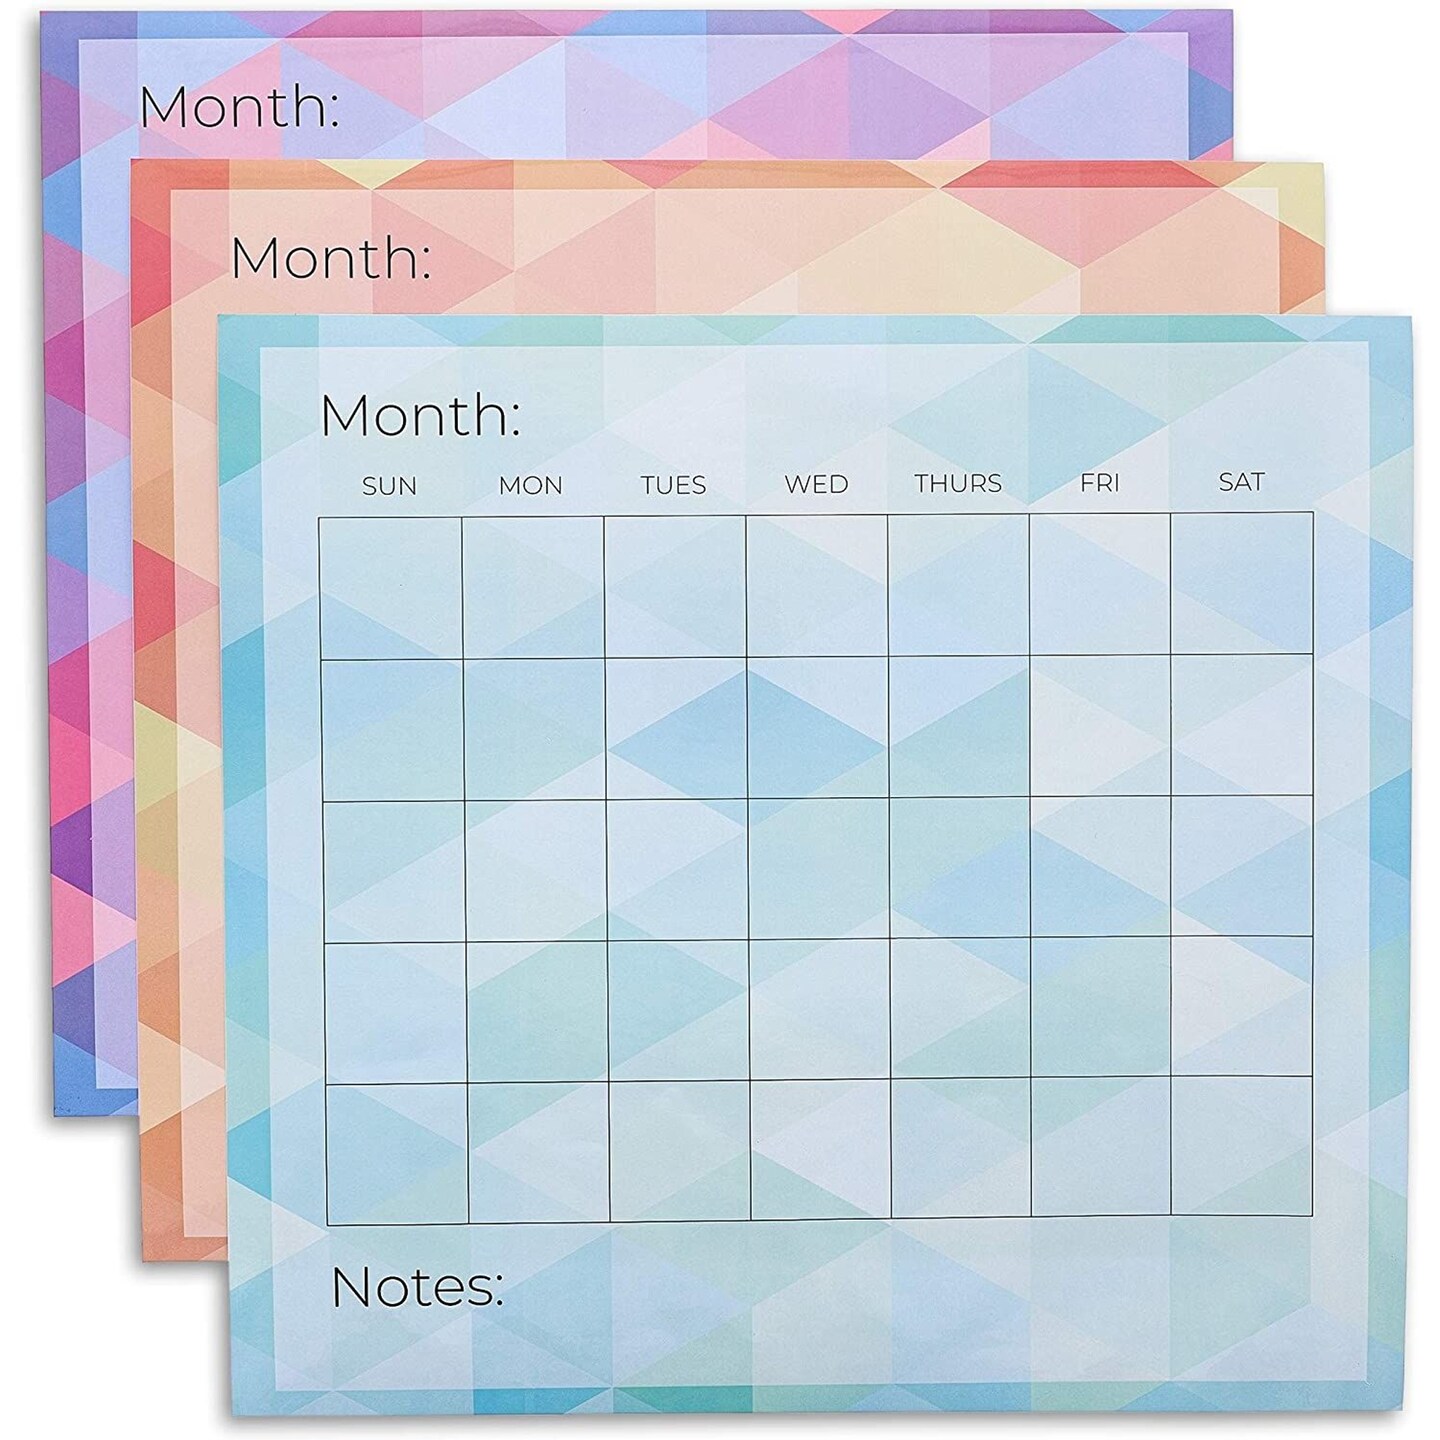 6 Pack Undated Monthly Adhesive Peel and Stick Calendar Reusable Calendar for Wall, Home Office Schedule Reminders, Memo Notes, 3 Assorted Colors (13.75 x 12.8 In)